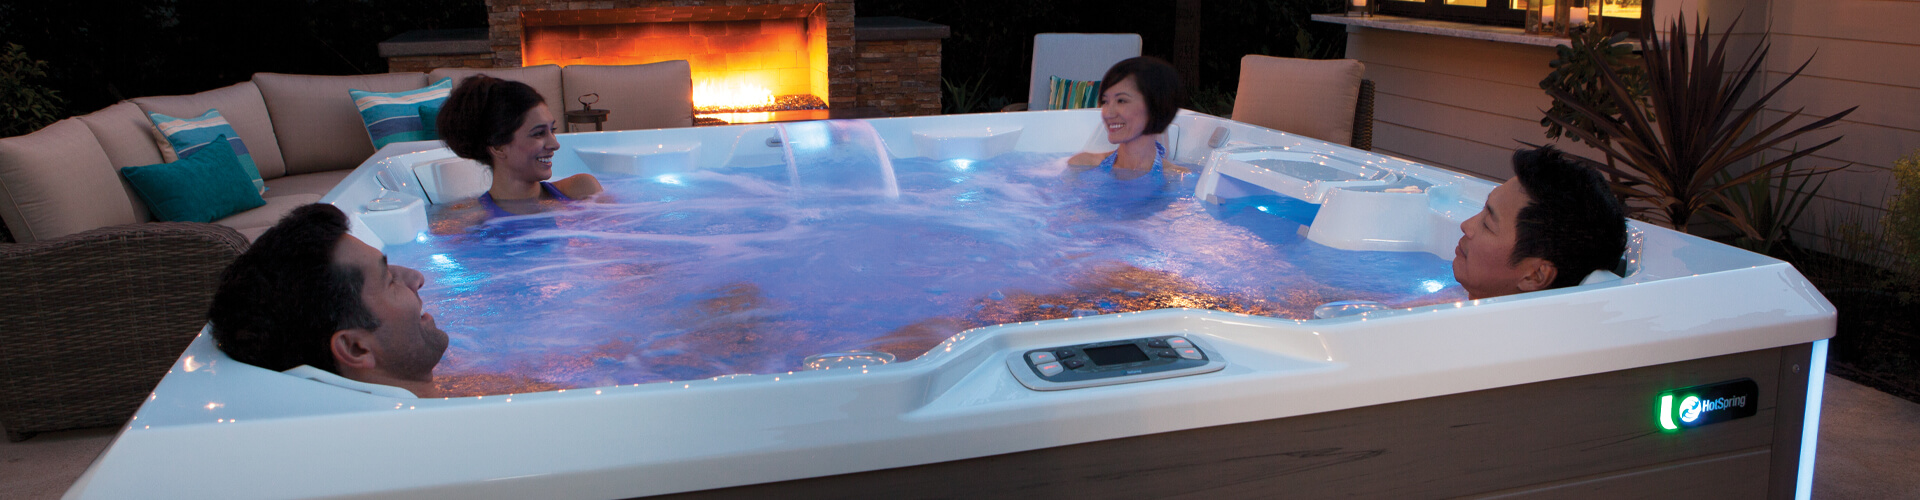 How Much Does it Cost to Run a Hot Tub? mobile hero